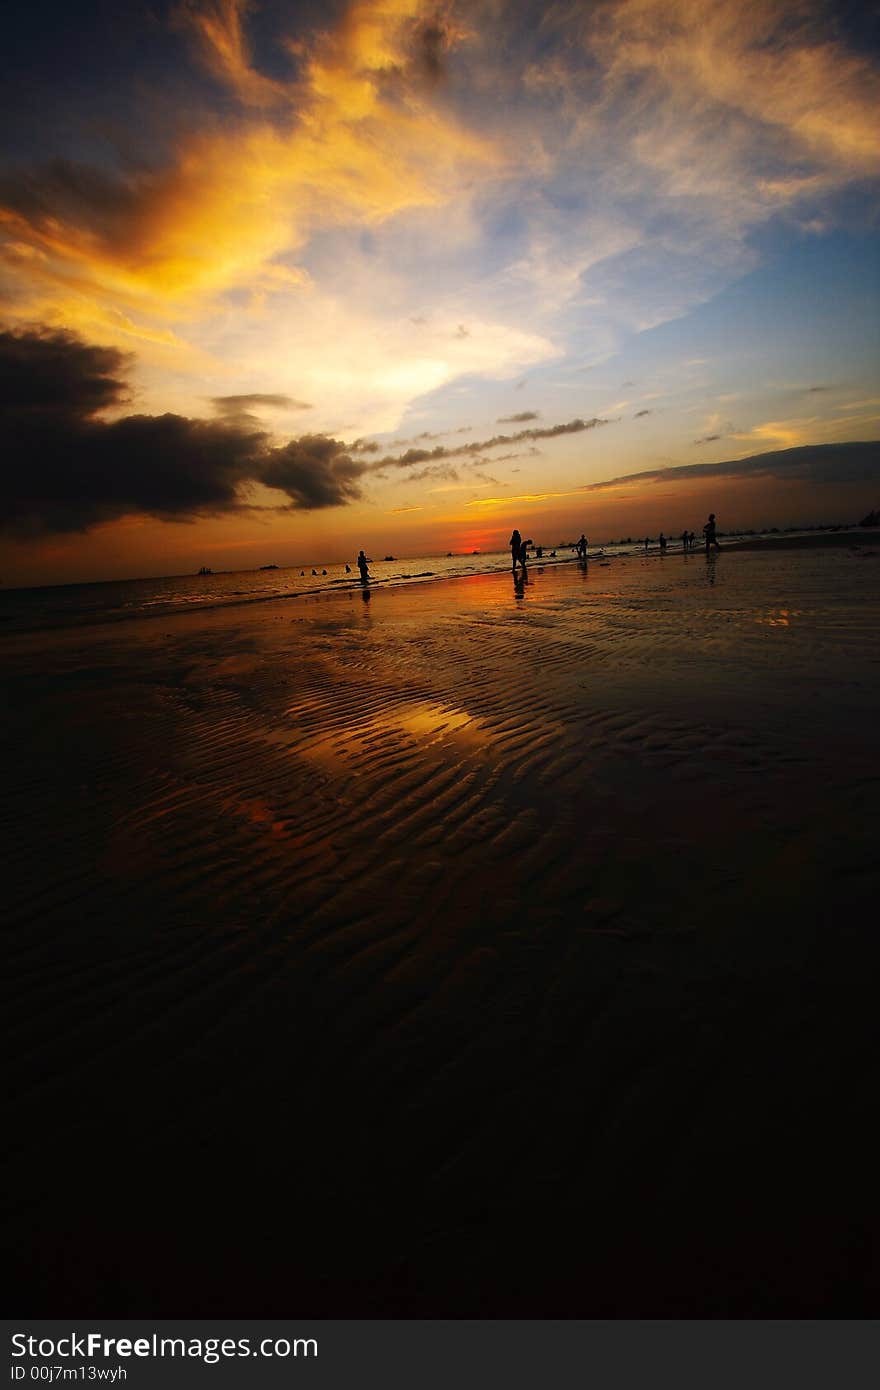 Sunset in a tropical beach in the philippines. silhouettes of people, beautiful cloud formations and sand ripples shown. Sunset in a tropical beach in the philippines. silhouettes of people, beautiful cloud formations and sand ripples shown